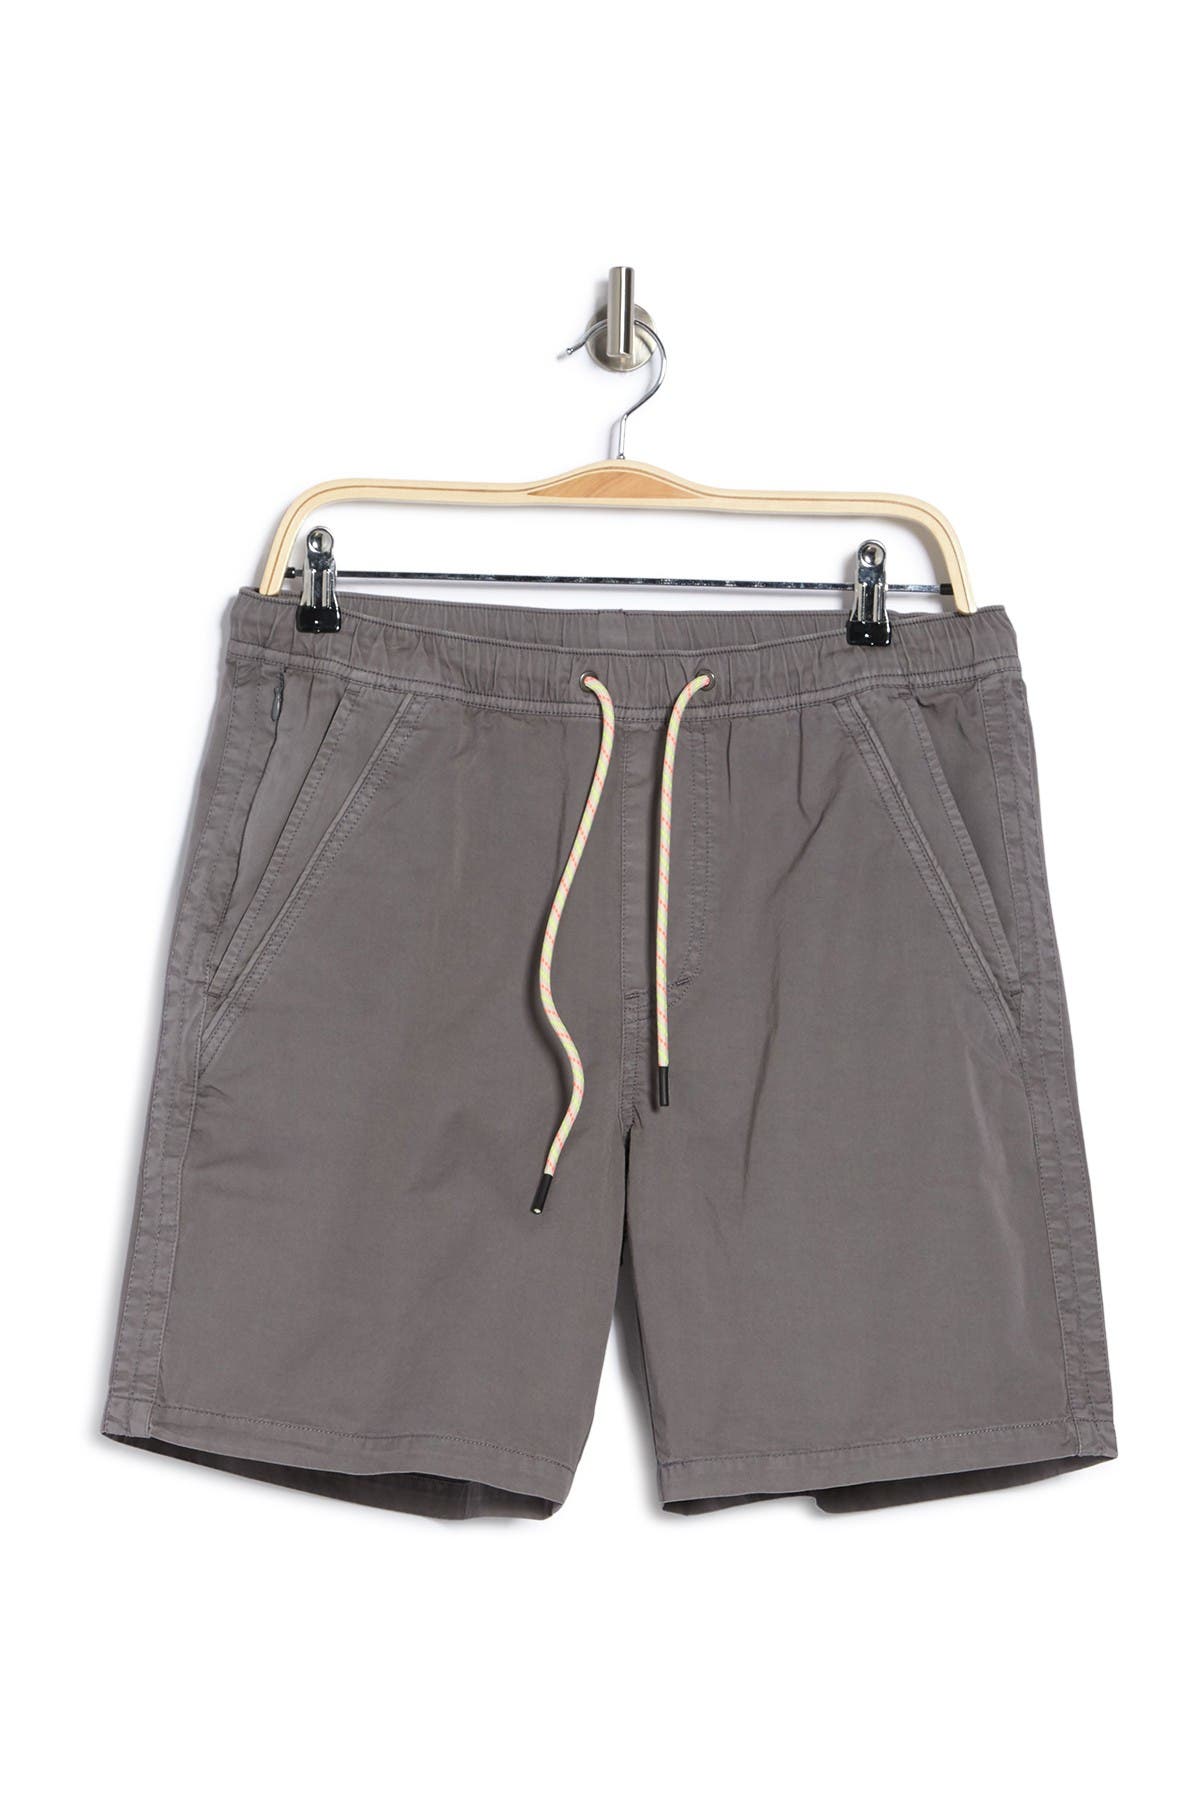 Union Denim Sun-sational Pull-on Woven Shorts In Bare